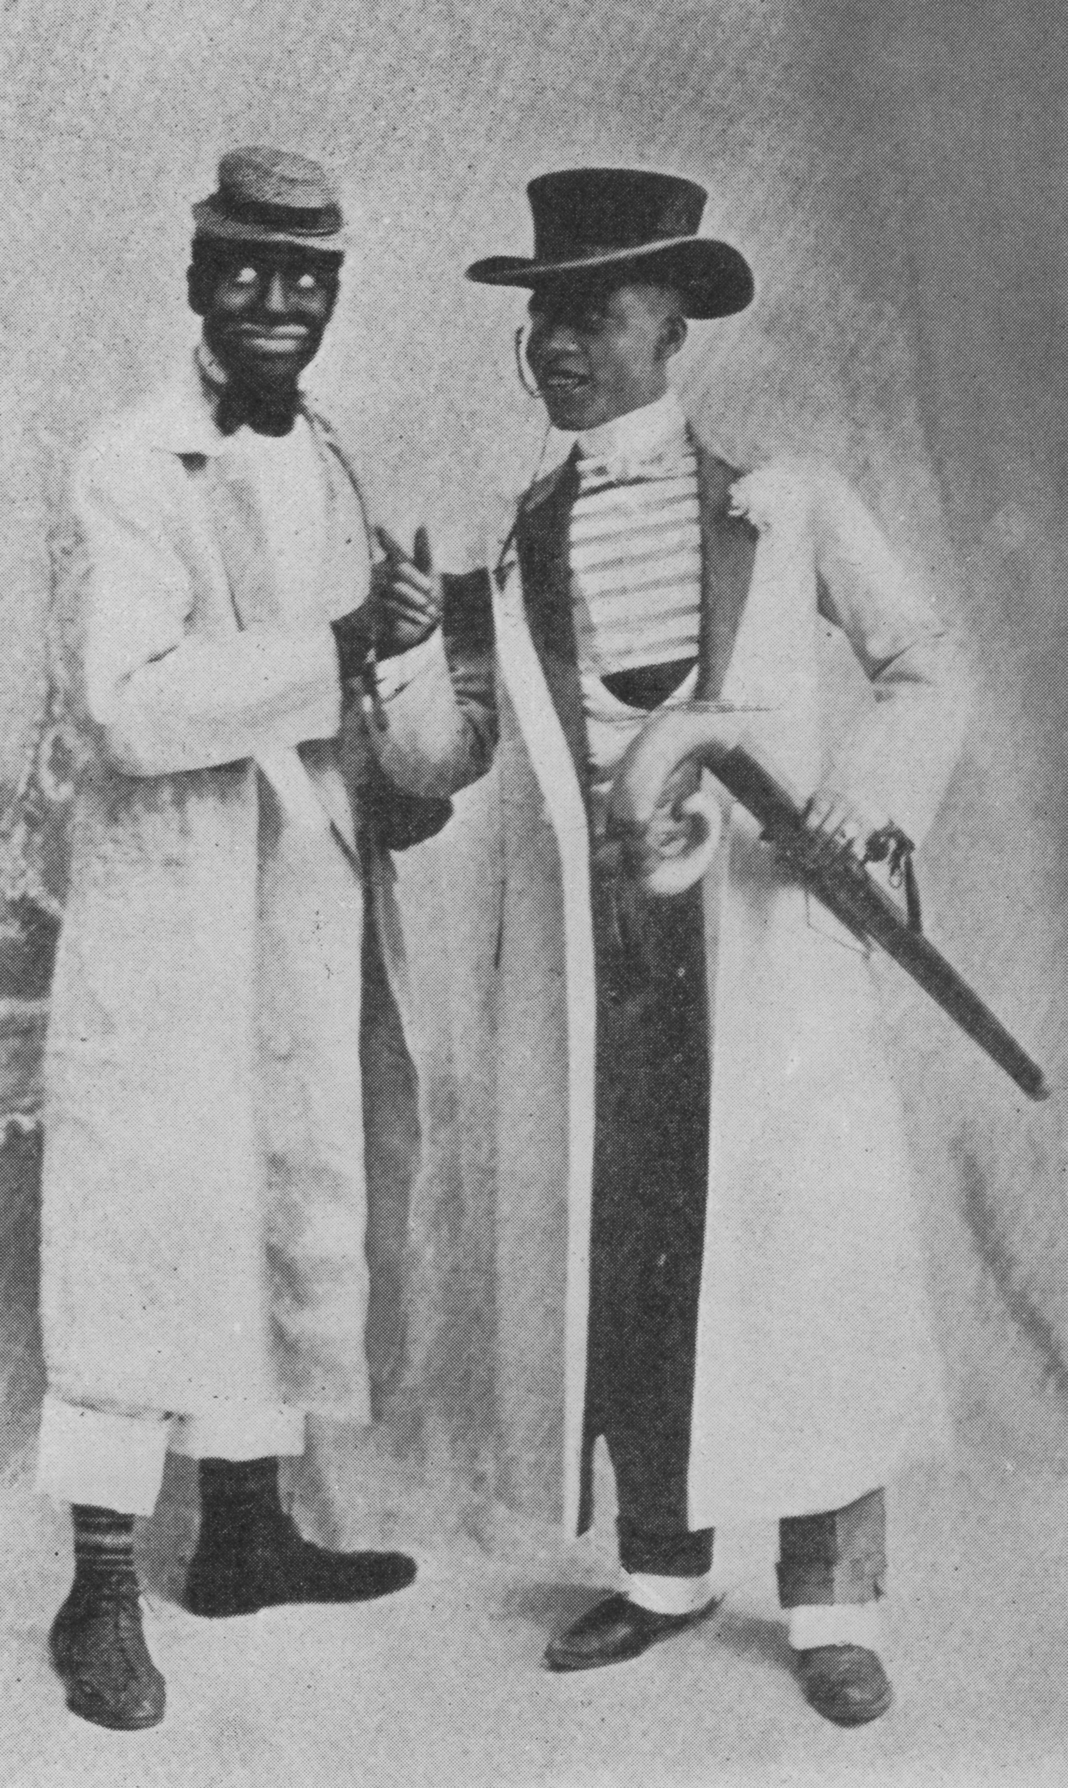 photograph of Williams and Walker in costume